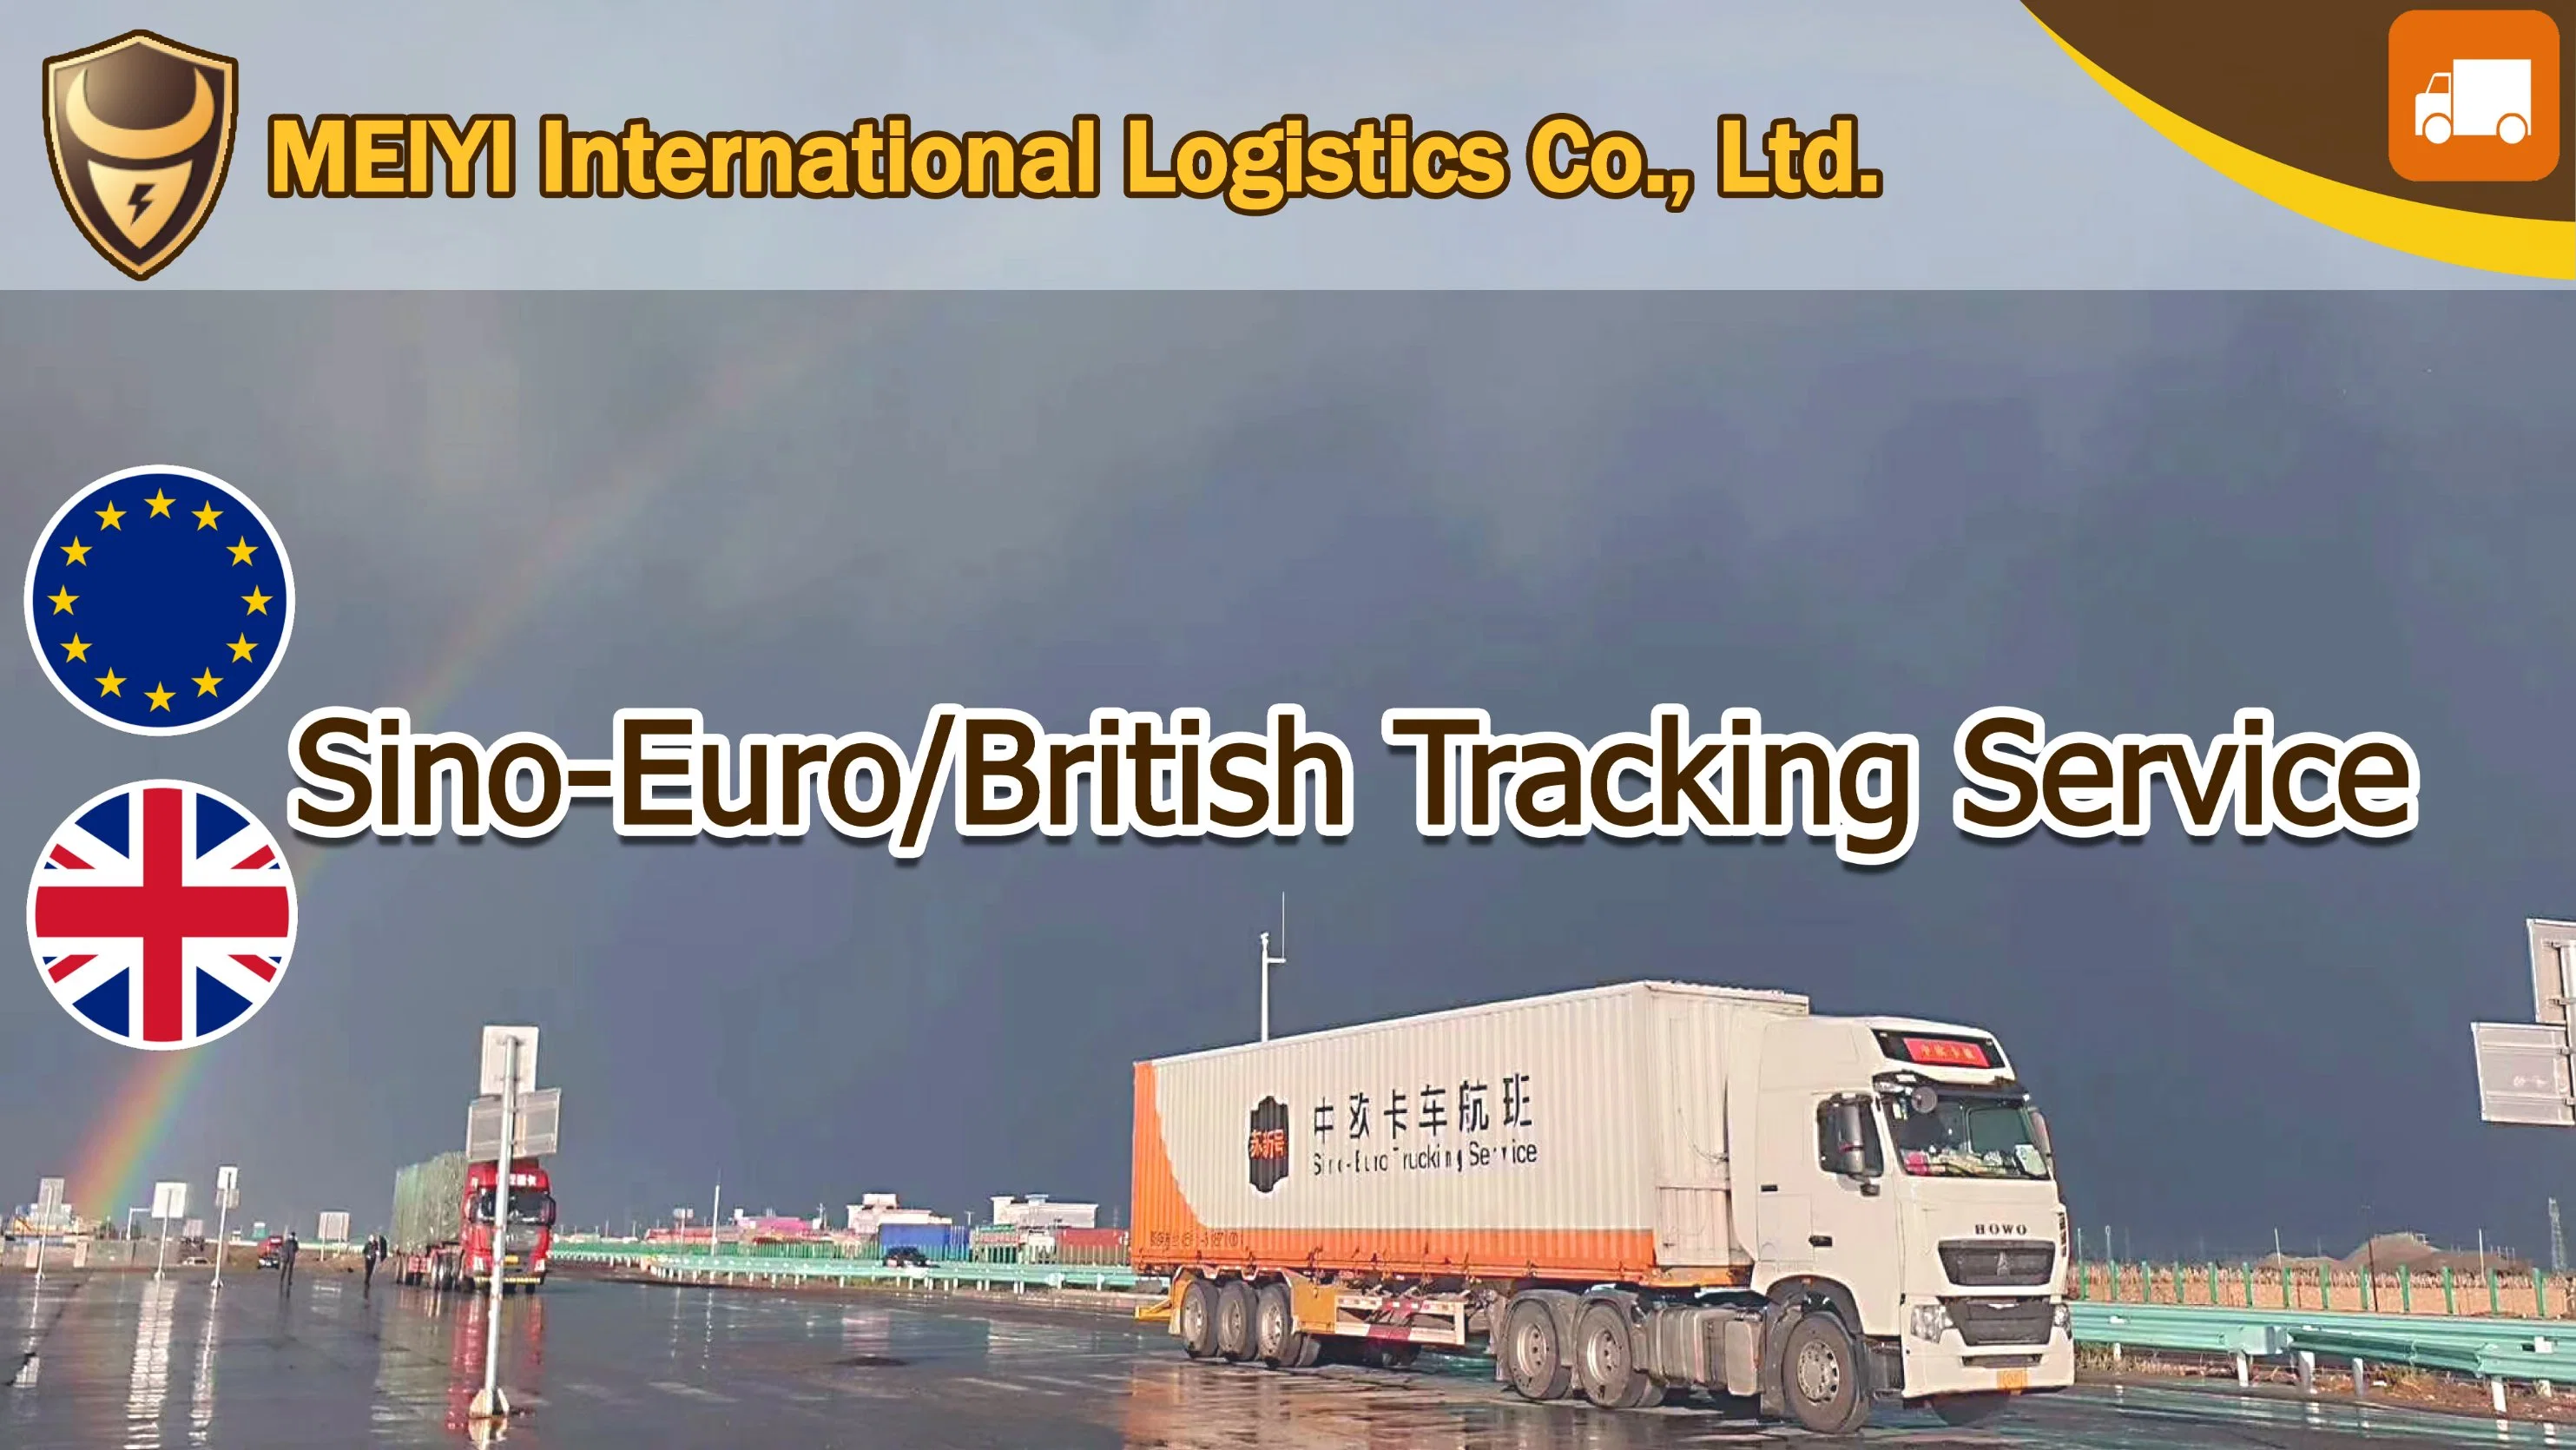 Shipping Forwarder: From China to Denmark freight forwader by europe price  by Sea/Air/Railway/Truckage Door to Door